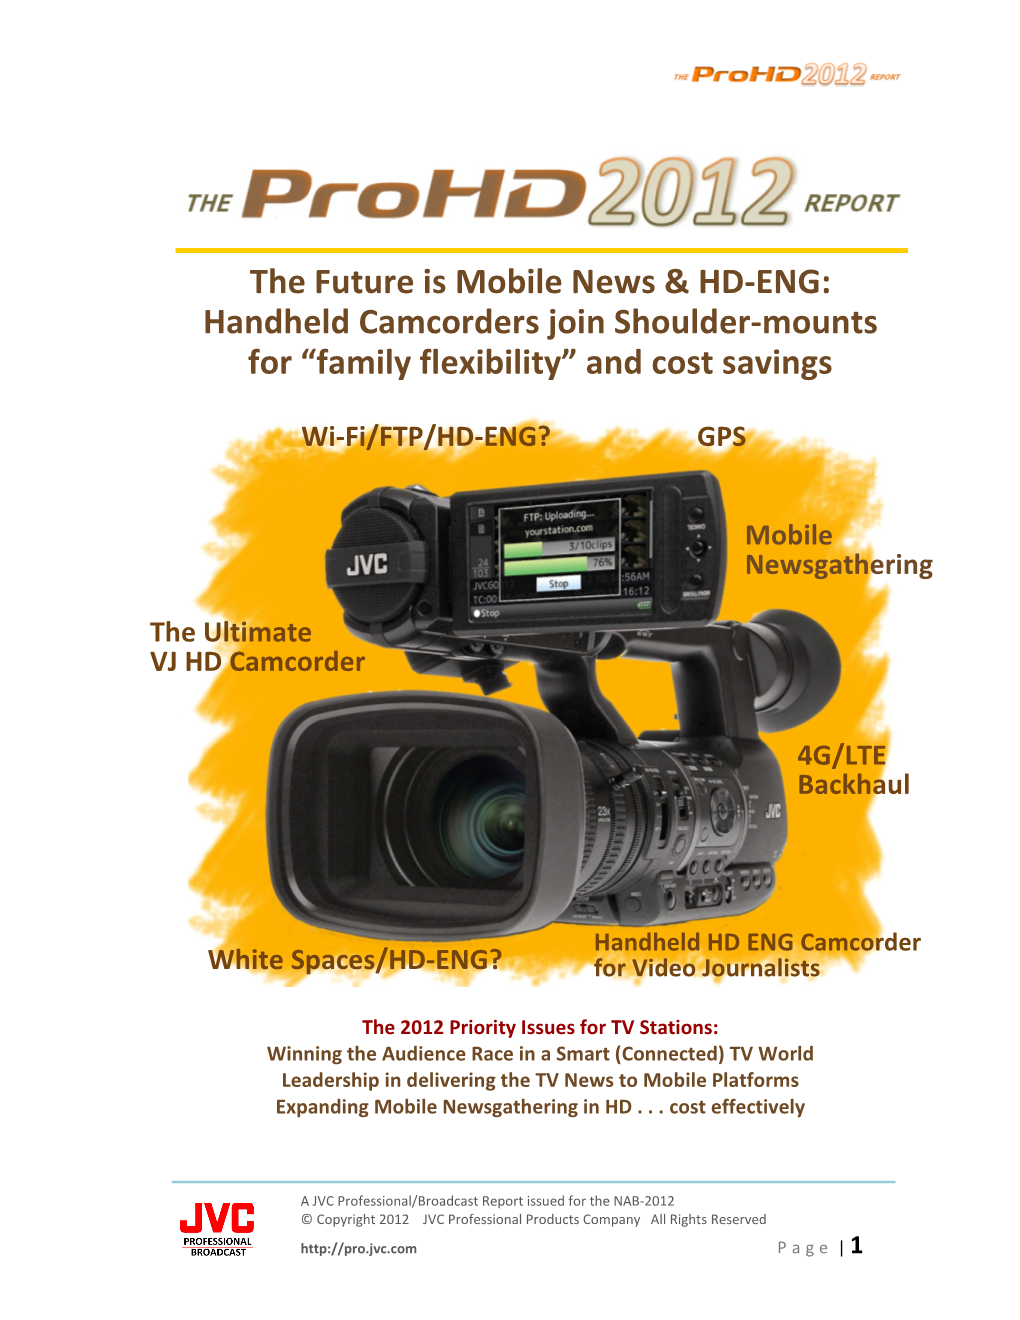 Handheld Camcorders Join Shoulder-Mounts for “Family Flexibility” and Cost Savings